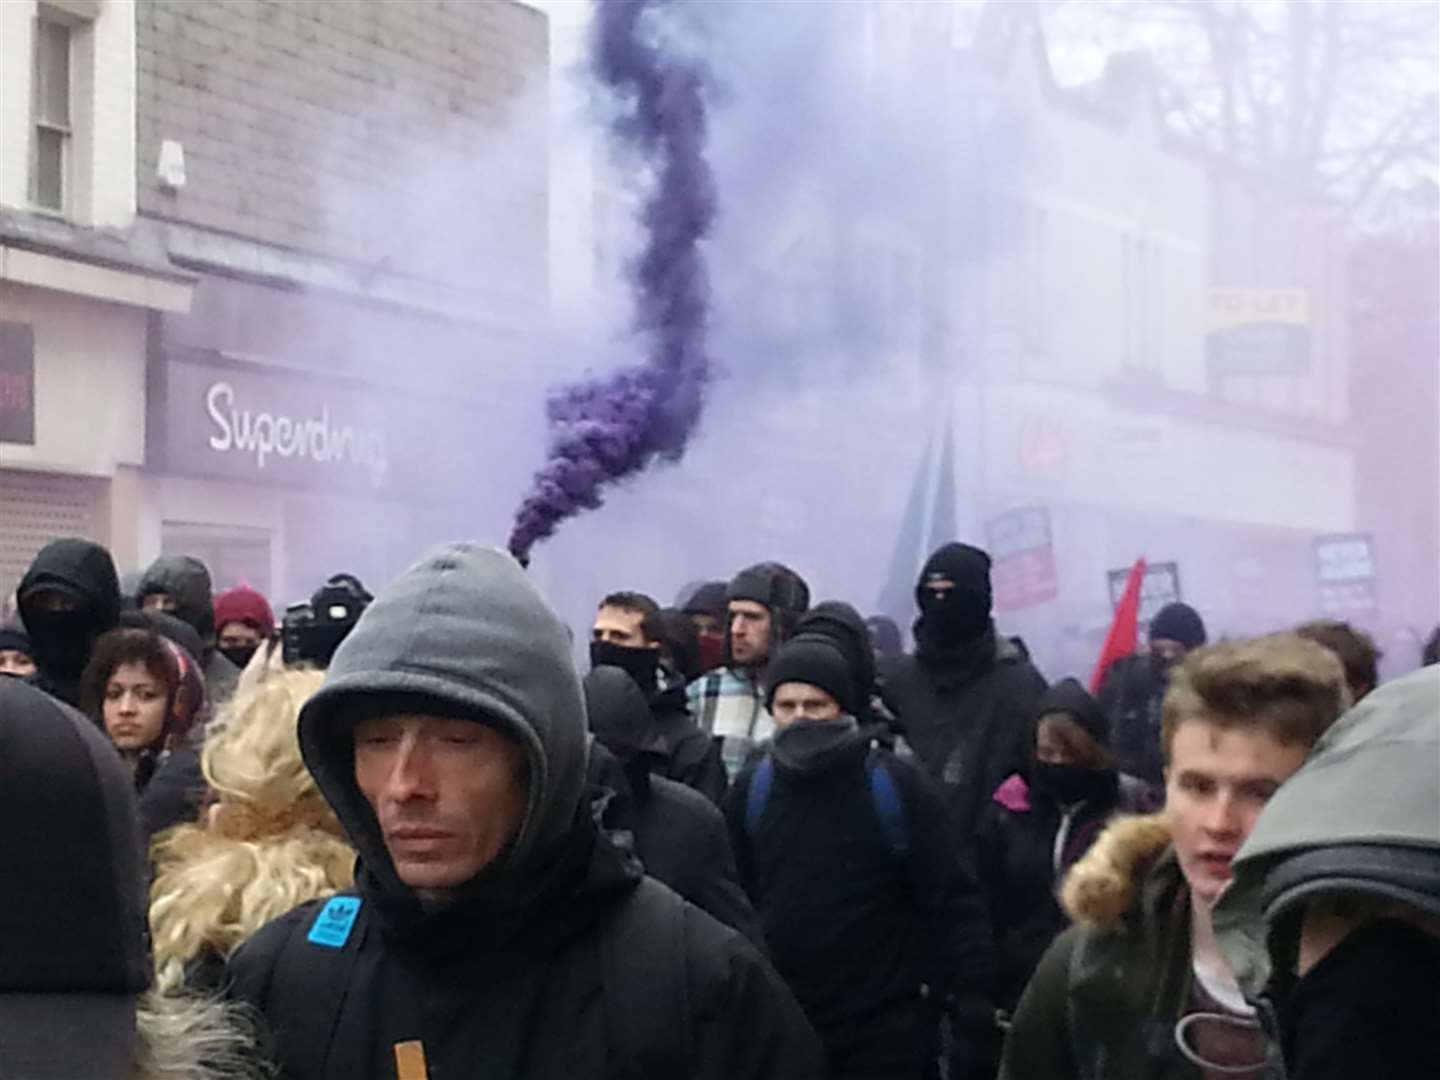 Flares were let off by anti-fascist protestors